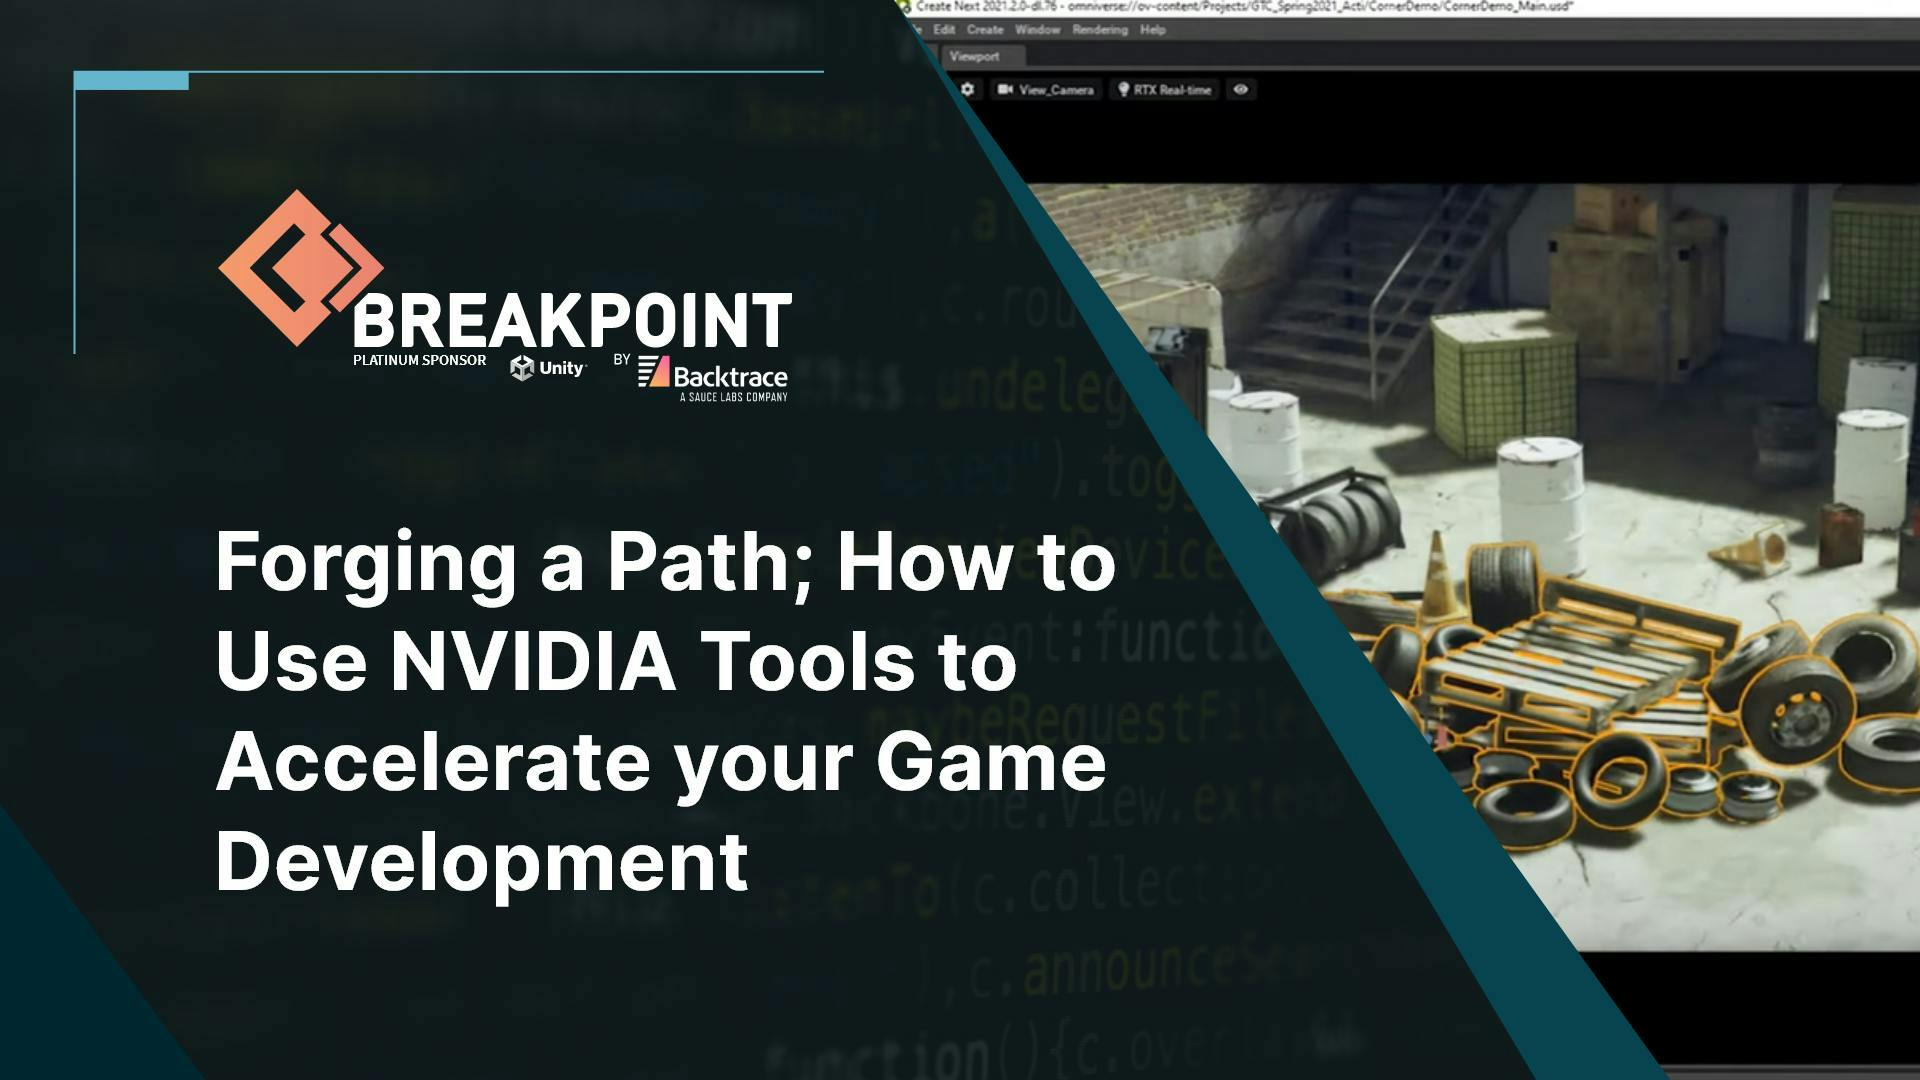 Breakpoint: Forging a Path: How to use Nvidia graphics tools to accelerate your game's development